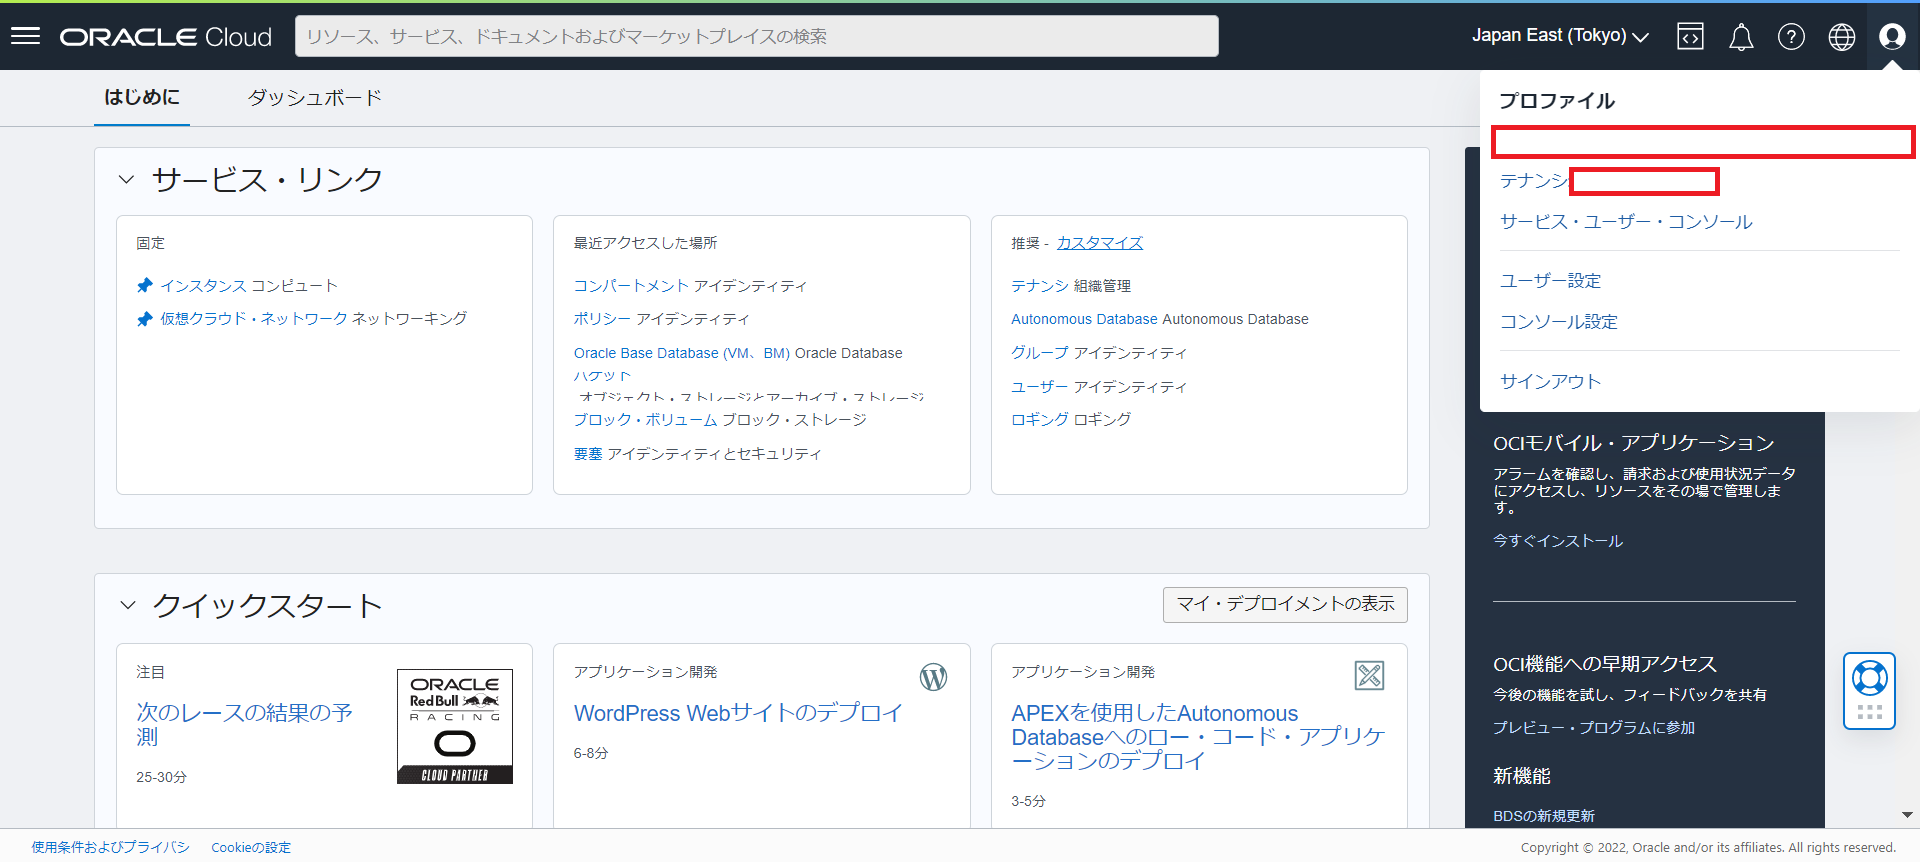 Oracle Cloud Infrastructure Functionsではじめるサーバレス入門 6